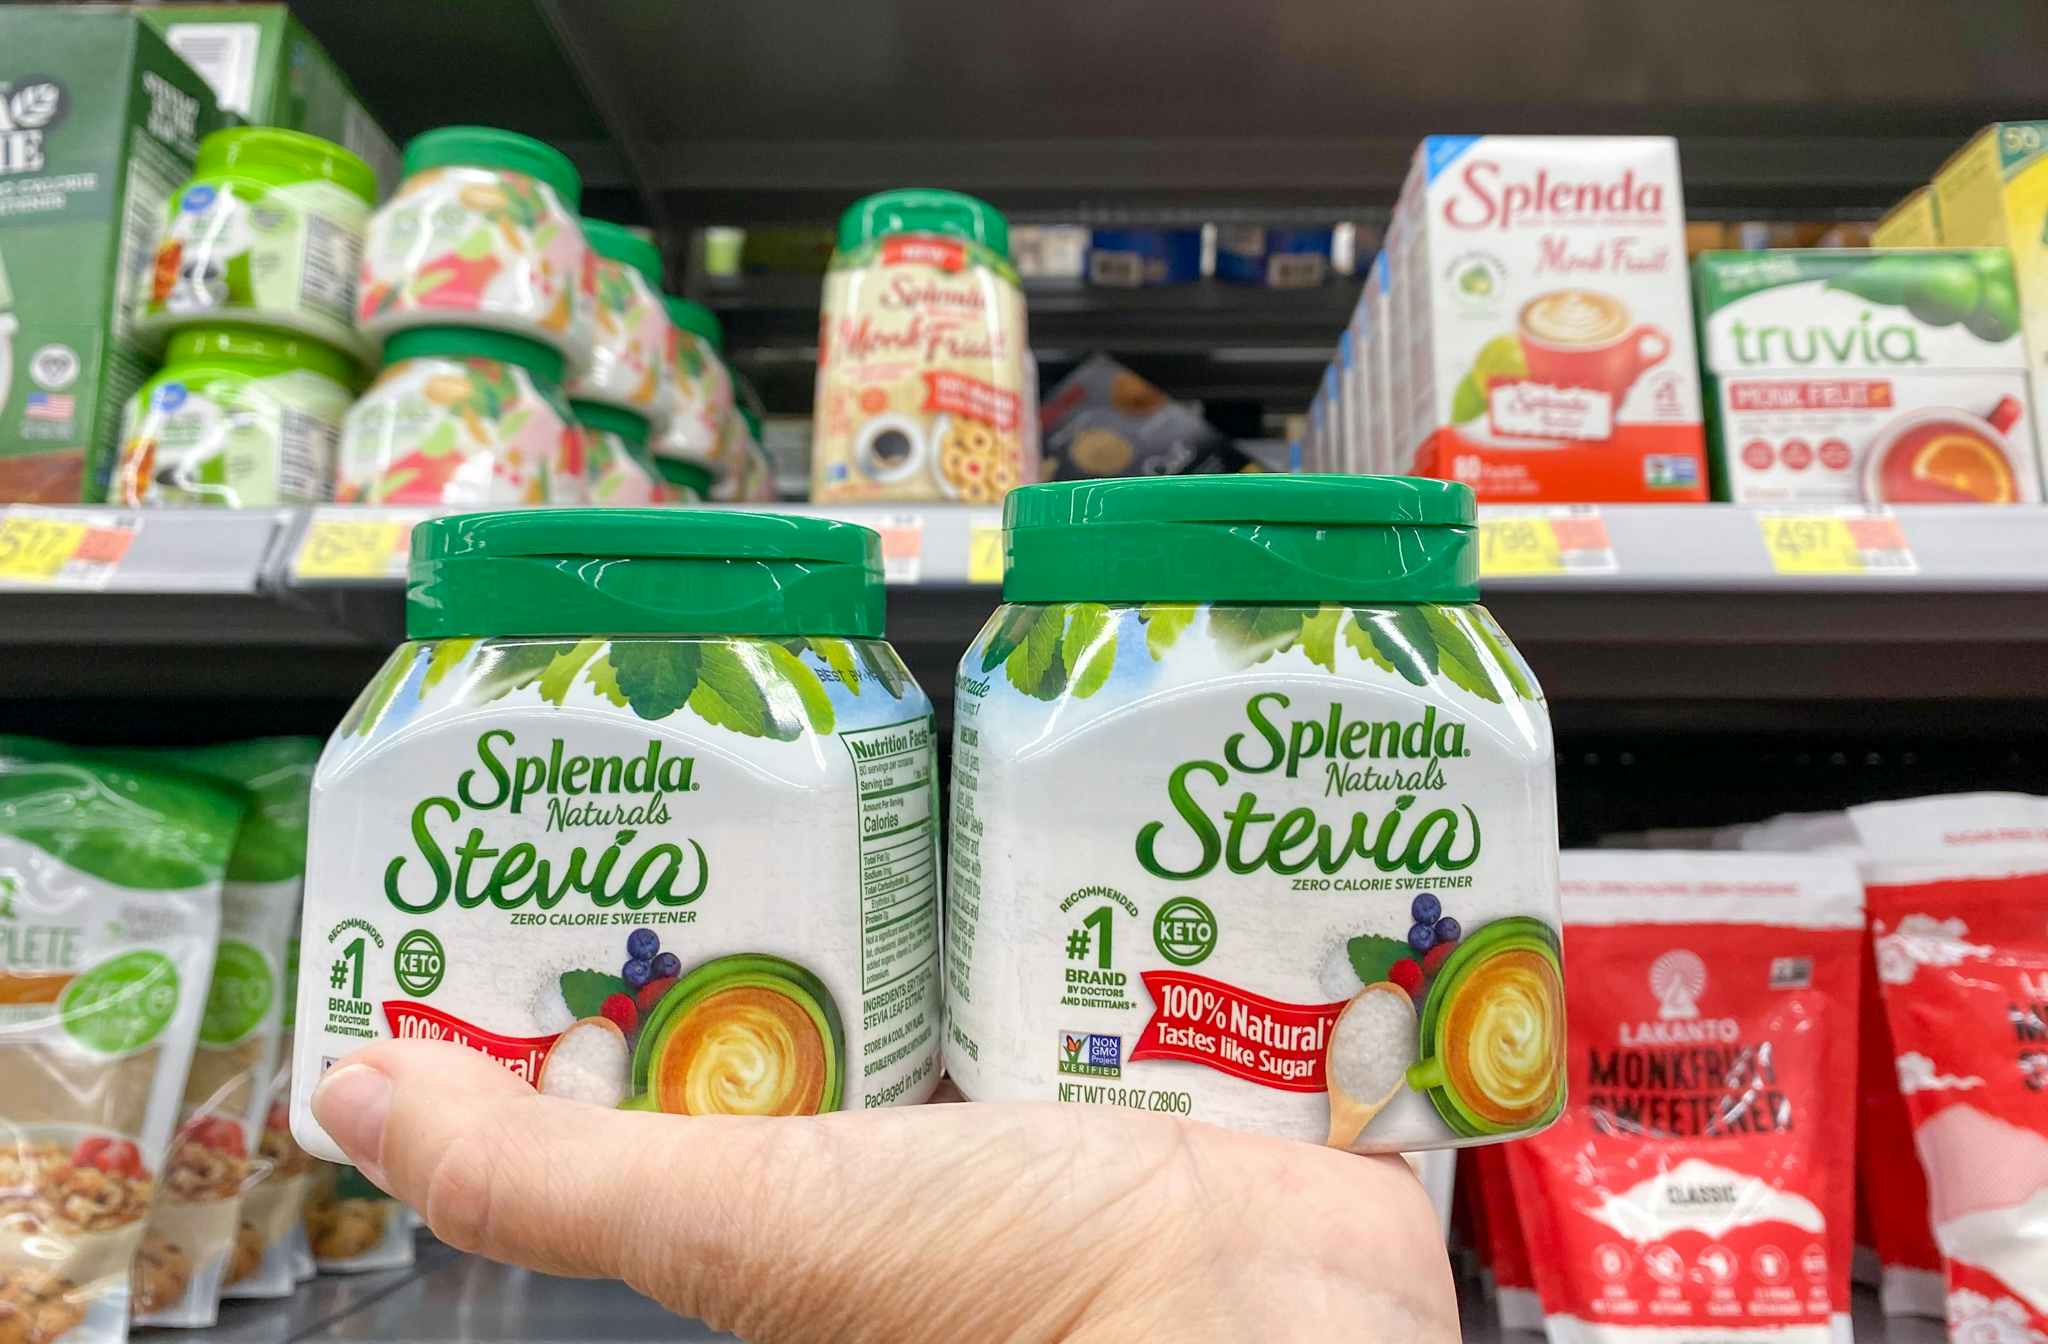 Two containers of Splenda Stevia held in hand at Walmart